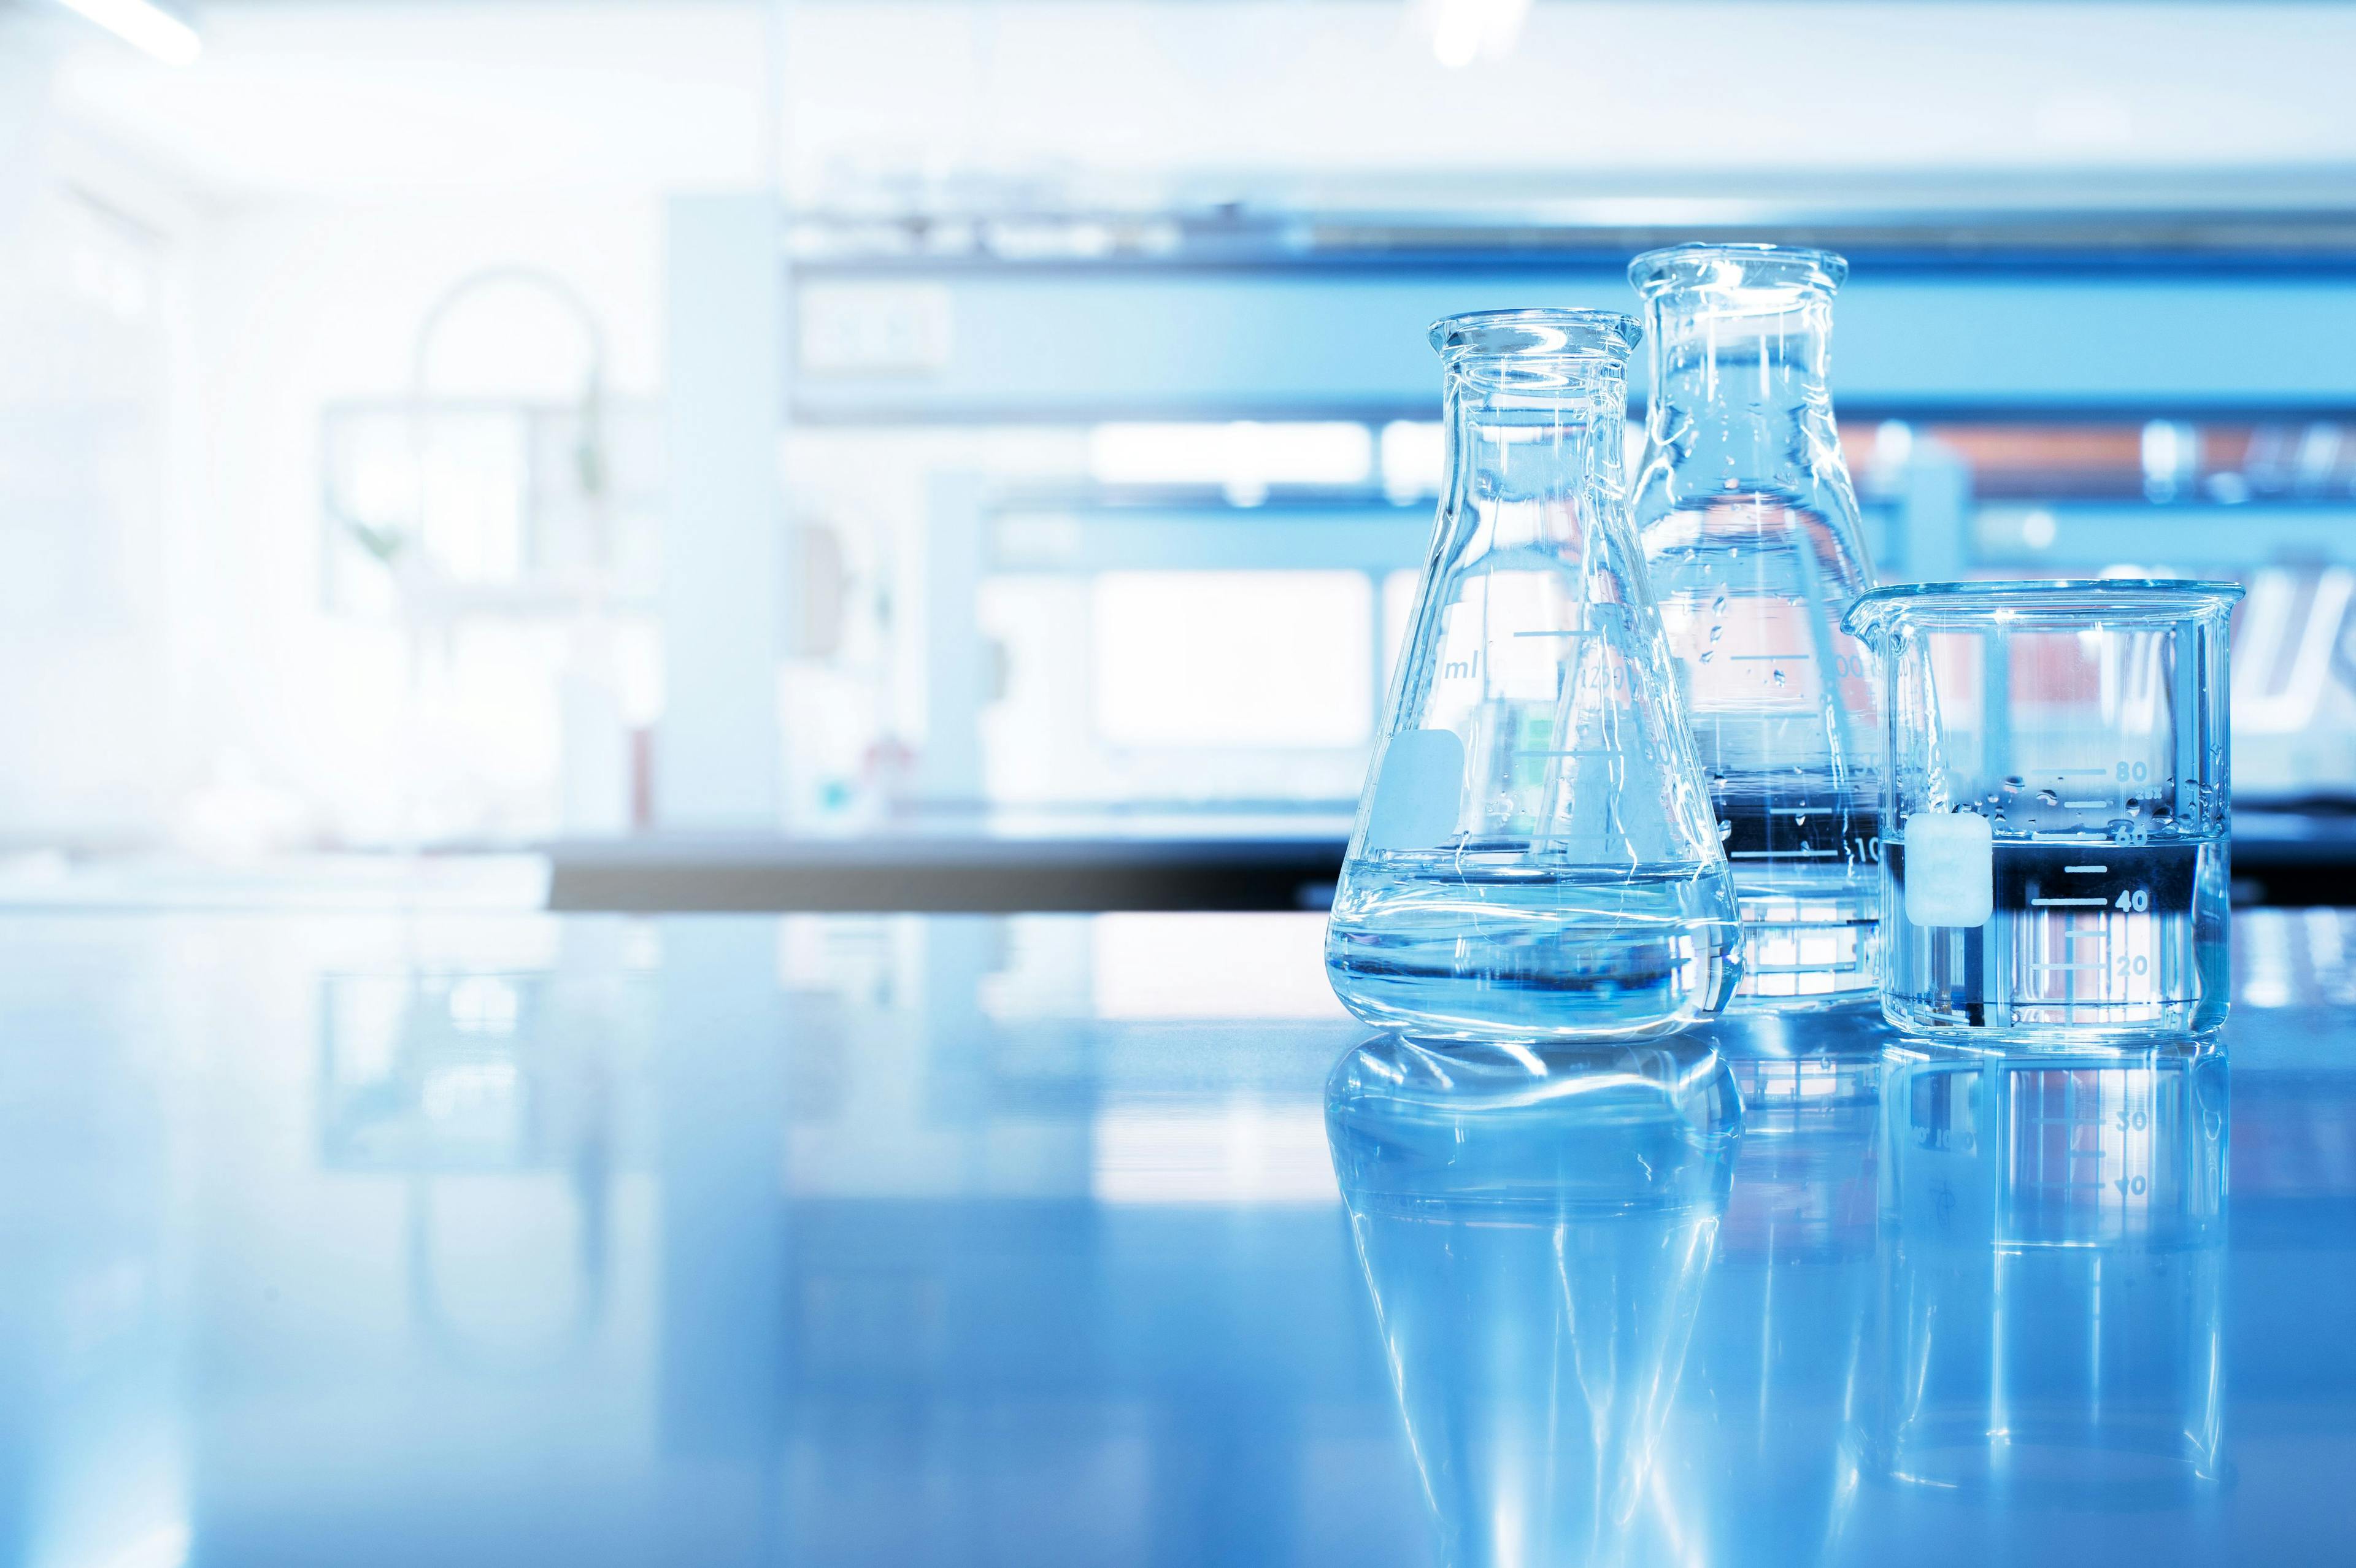 water in beaker and flask glass in chemistry blue science laboratory background